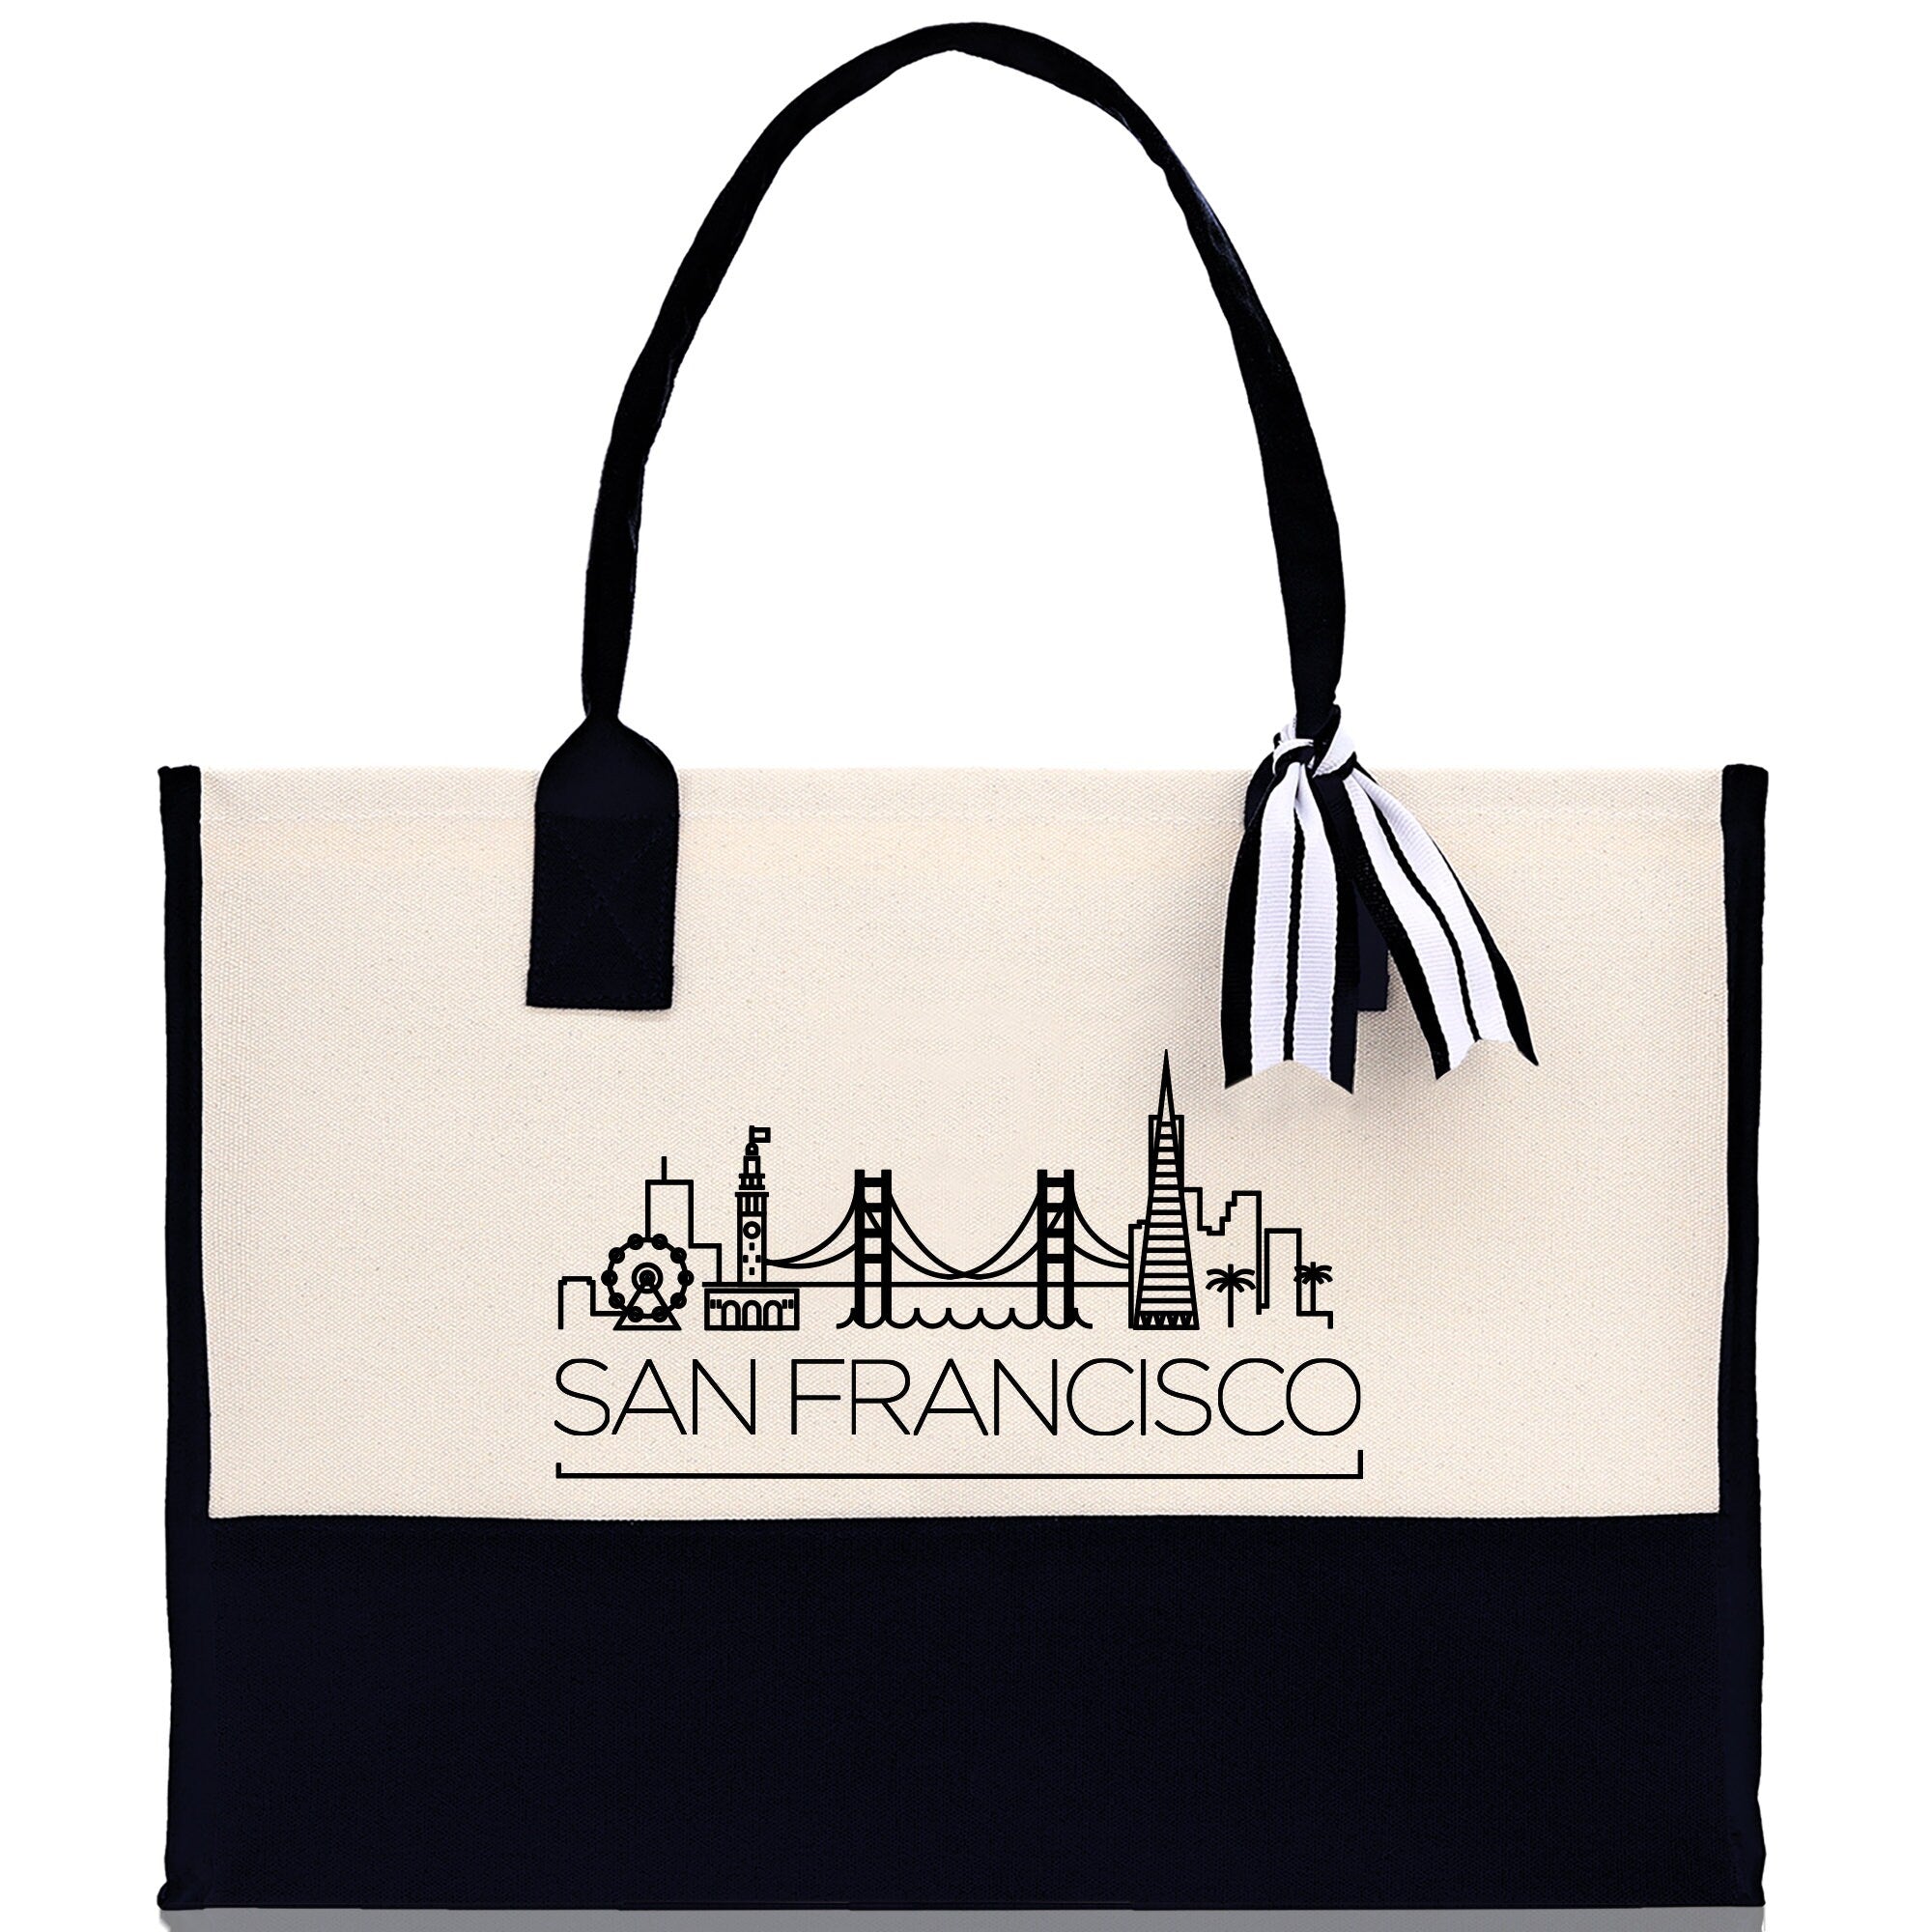 San Francisco Canvas Tote Bag SF Travel Vacation Tote Employee and Client Gift Wedding Favor Birthday Welcome Tote Bag Bridesmaid Gift